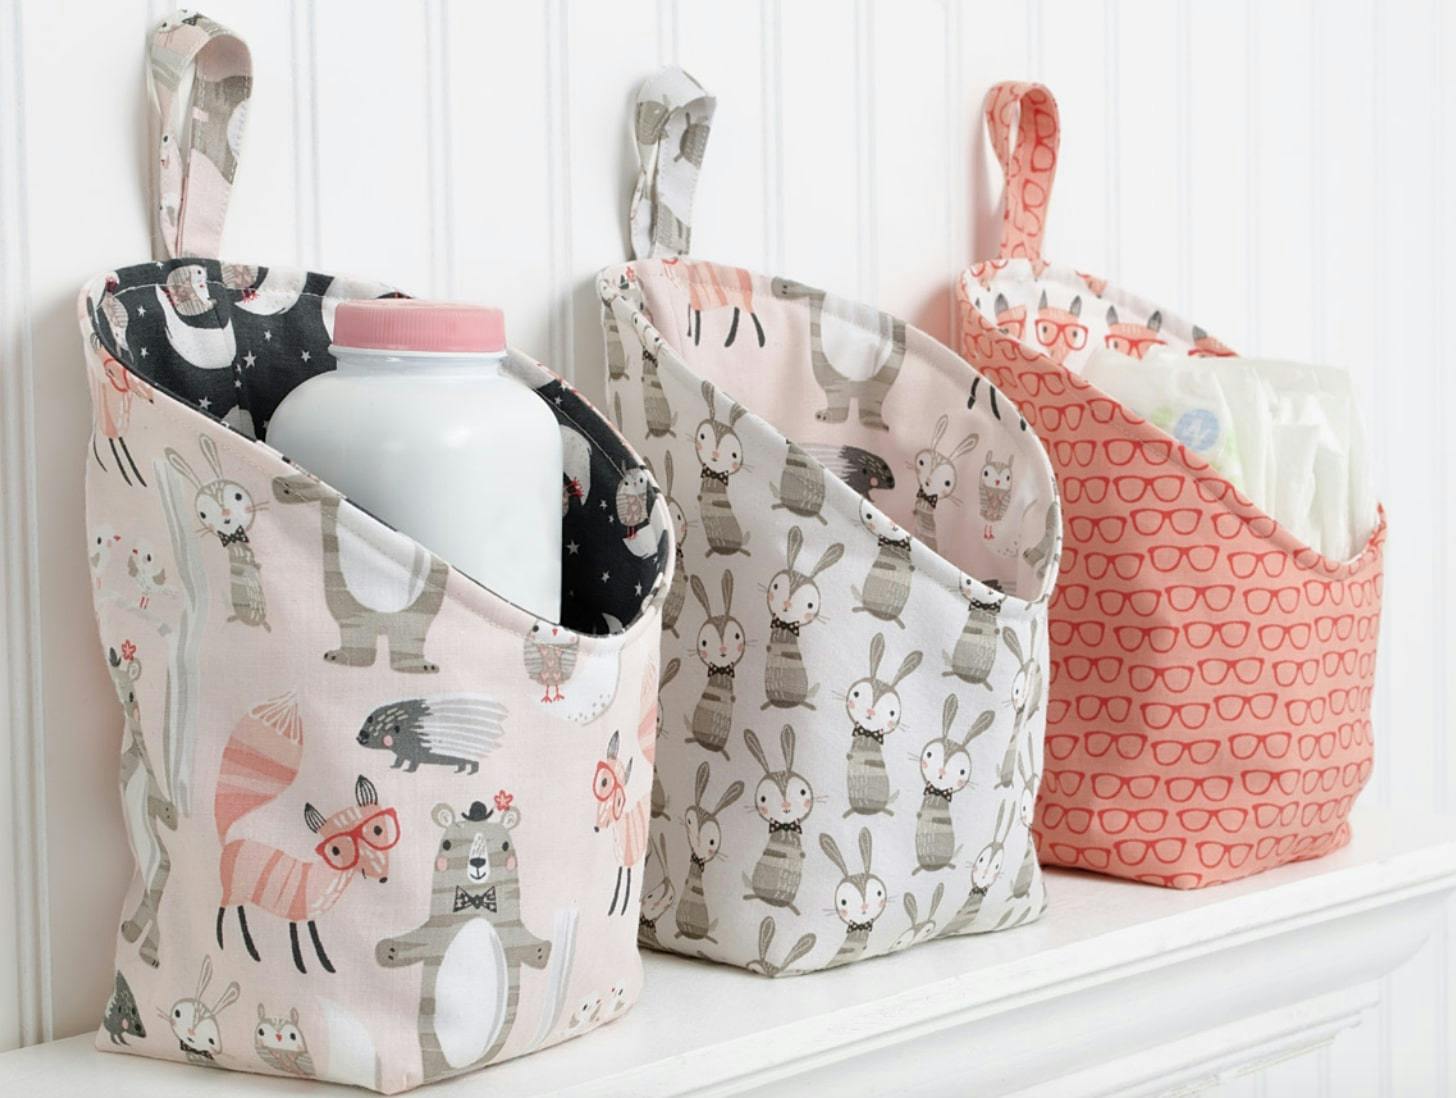 Quick and easy Mini Bags FREE sewing pattern - Sew Modern Bags